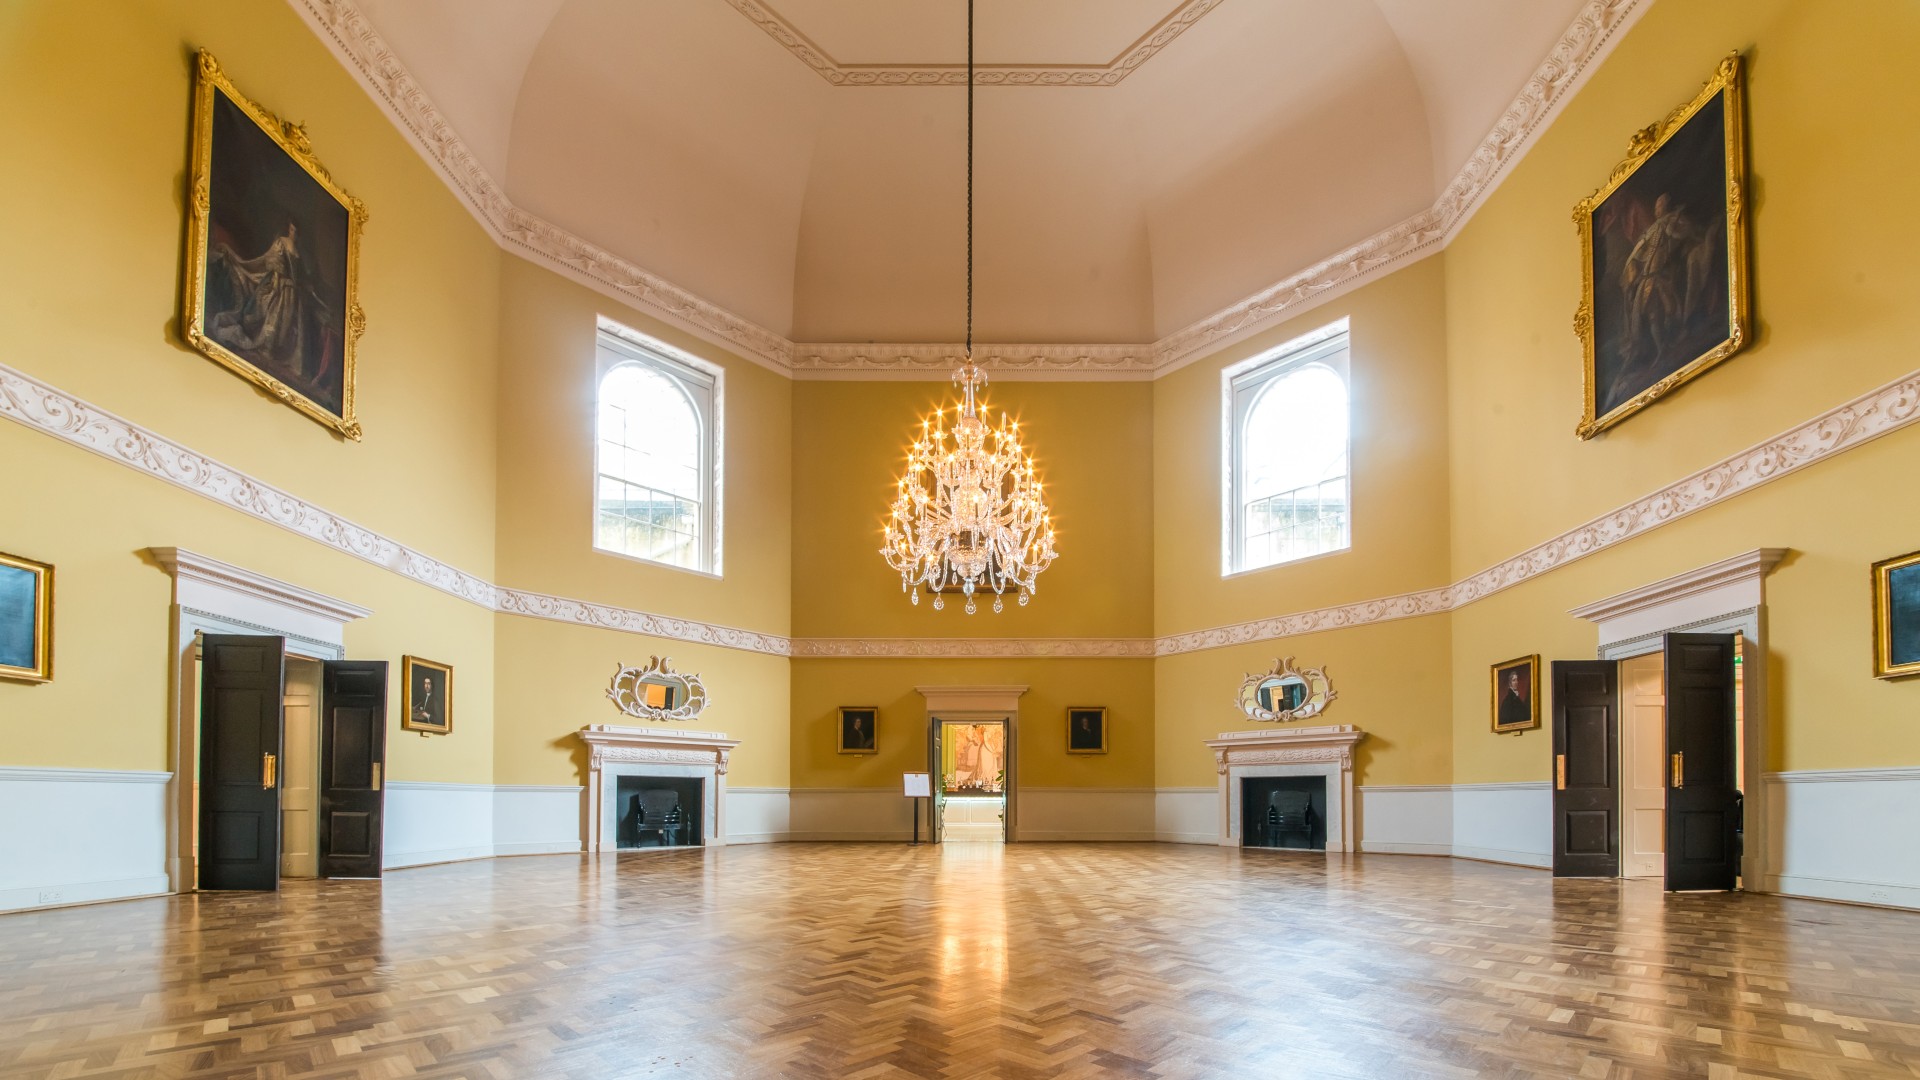 An empty room, painted yellow, decorated with a chandelier and paintings